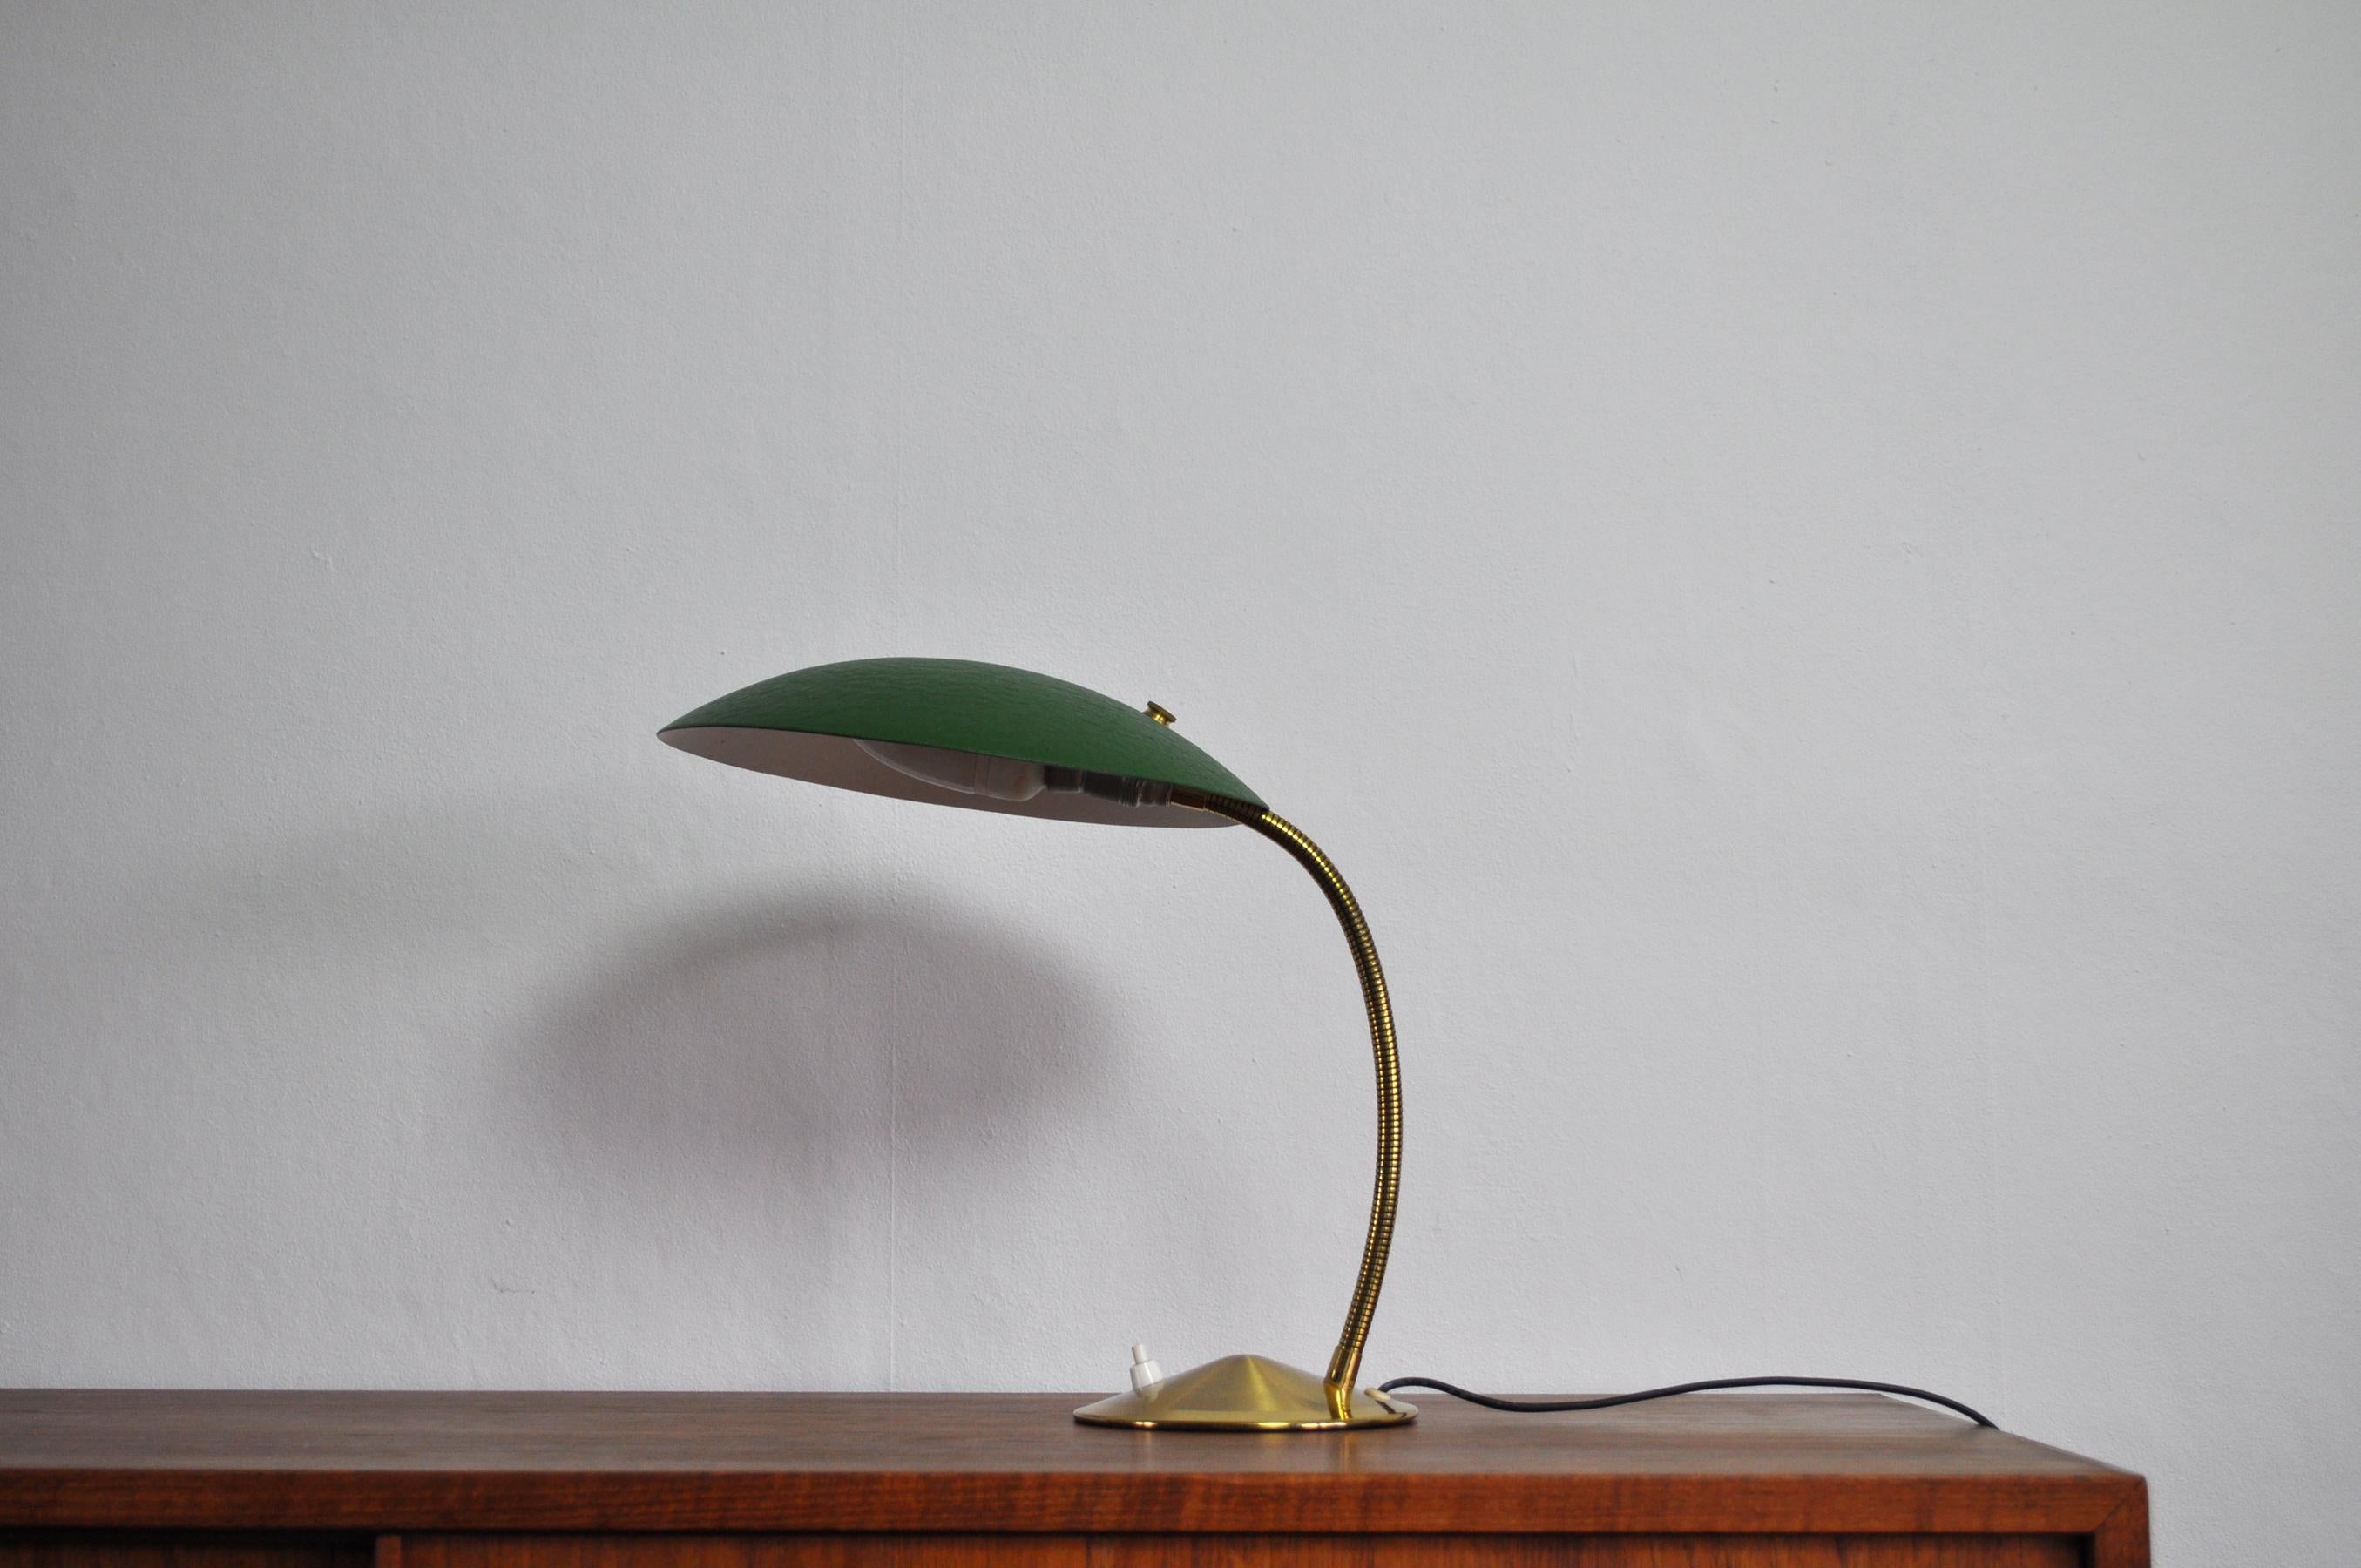 Bauhaus desk lamp with adjustable stem in brass rings, big green lacquered metal shade. Fine vintage condition with signs of wear consistent with age and use.

Light source: E27 Edison screw fitting. 
Dimensions: 
Height (adjustable) 35 cm